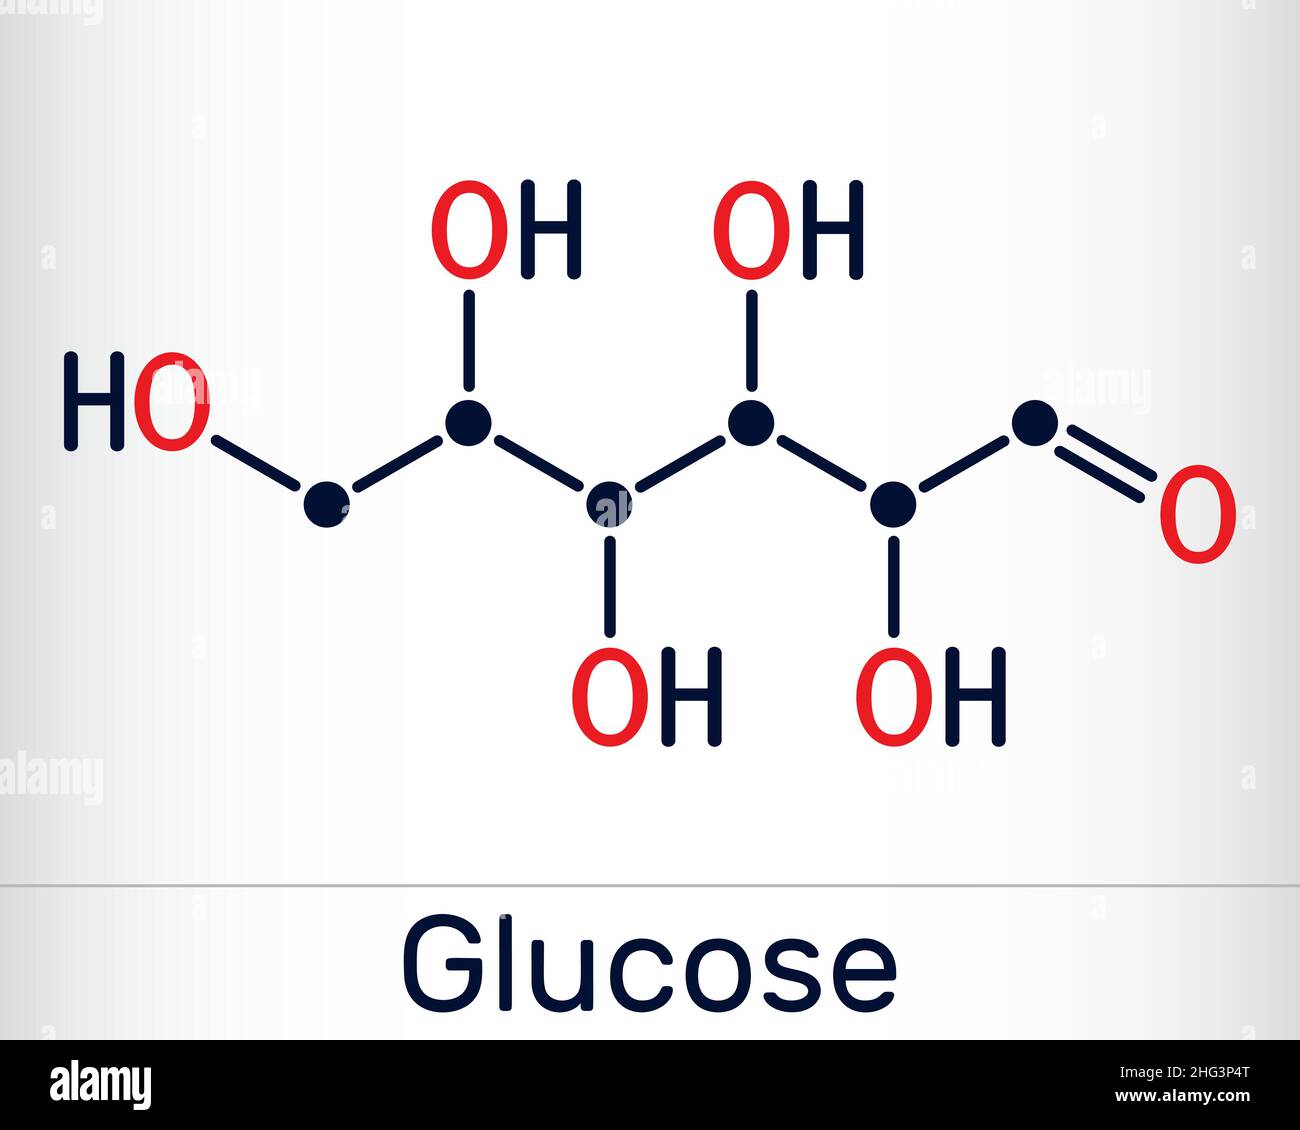 Glucose, dextrose, D-glucose, glucopyranose, C6H12O6 molecule. It is simple sugar, monosaccharide, subcategory of carbohydrates. Skeletal chemical for Stock Vector